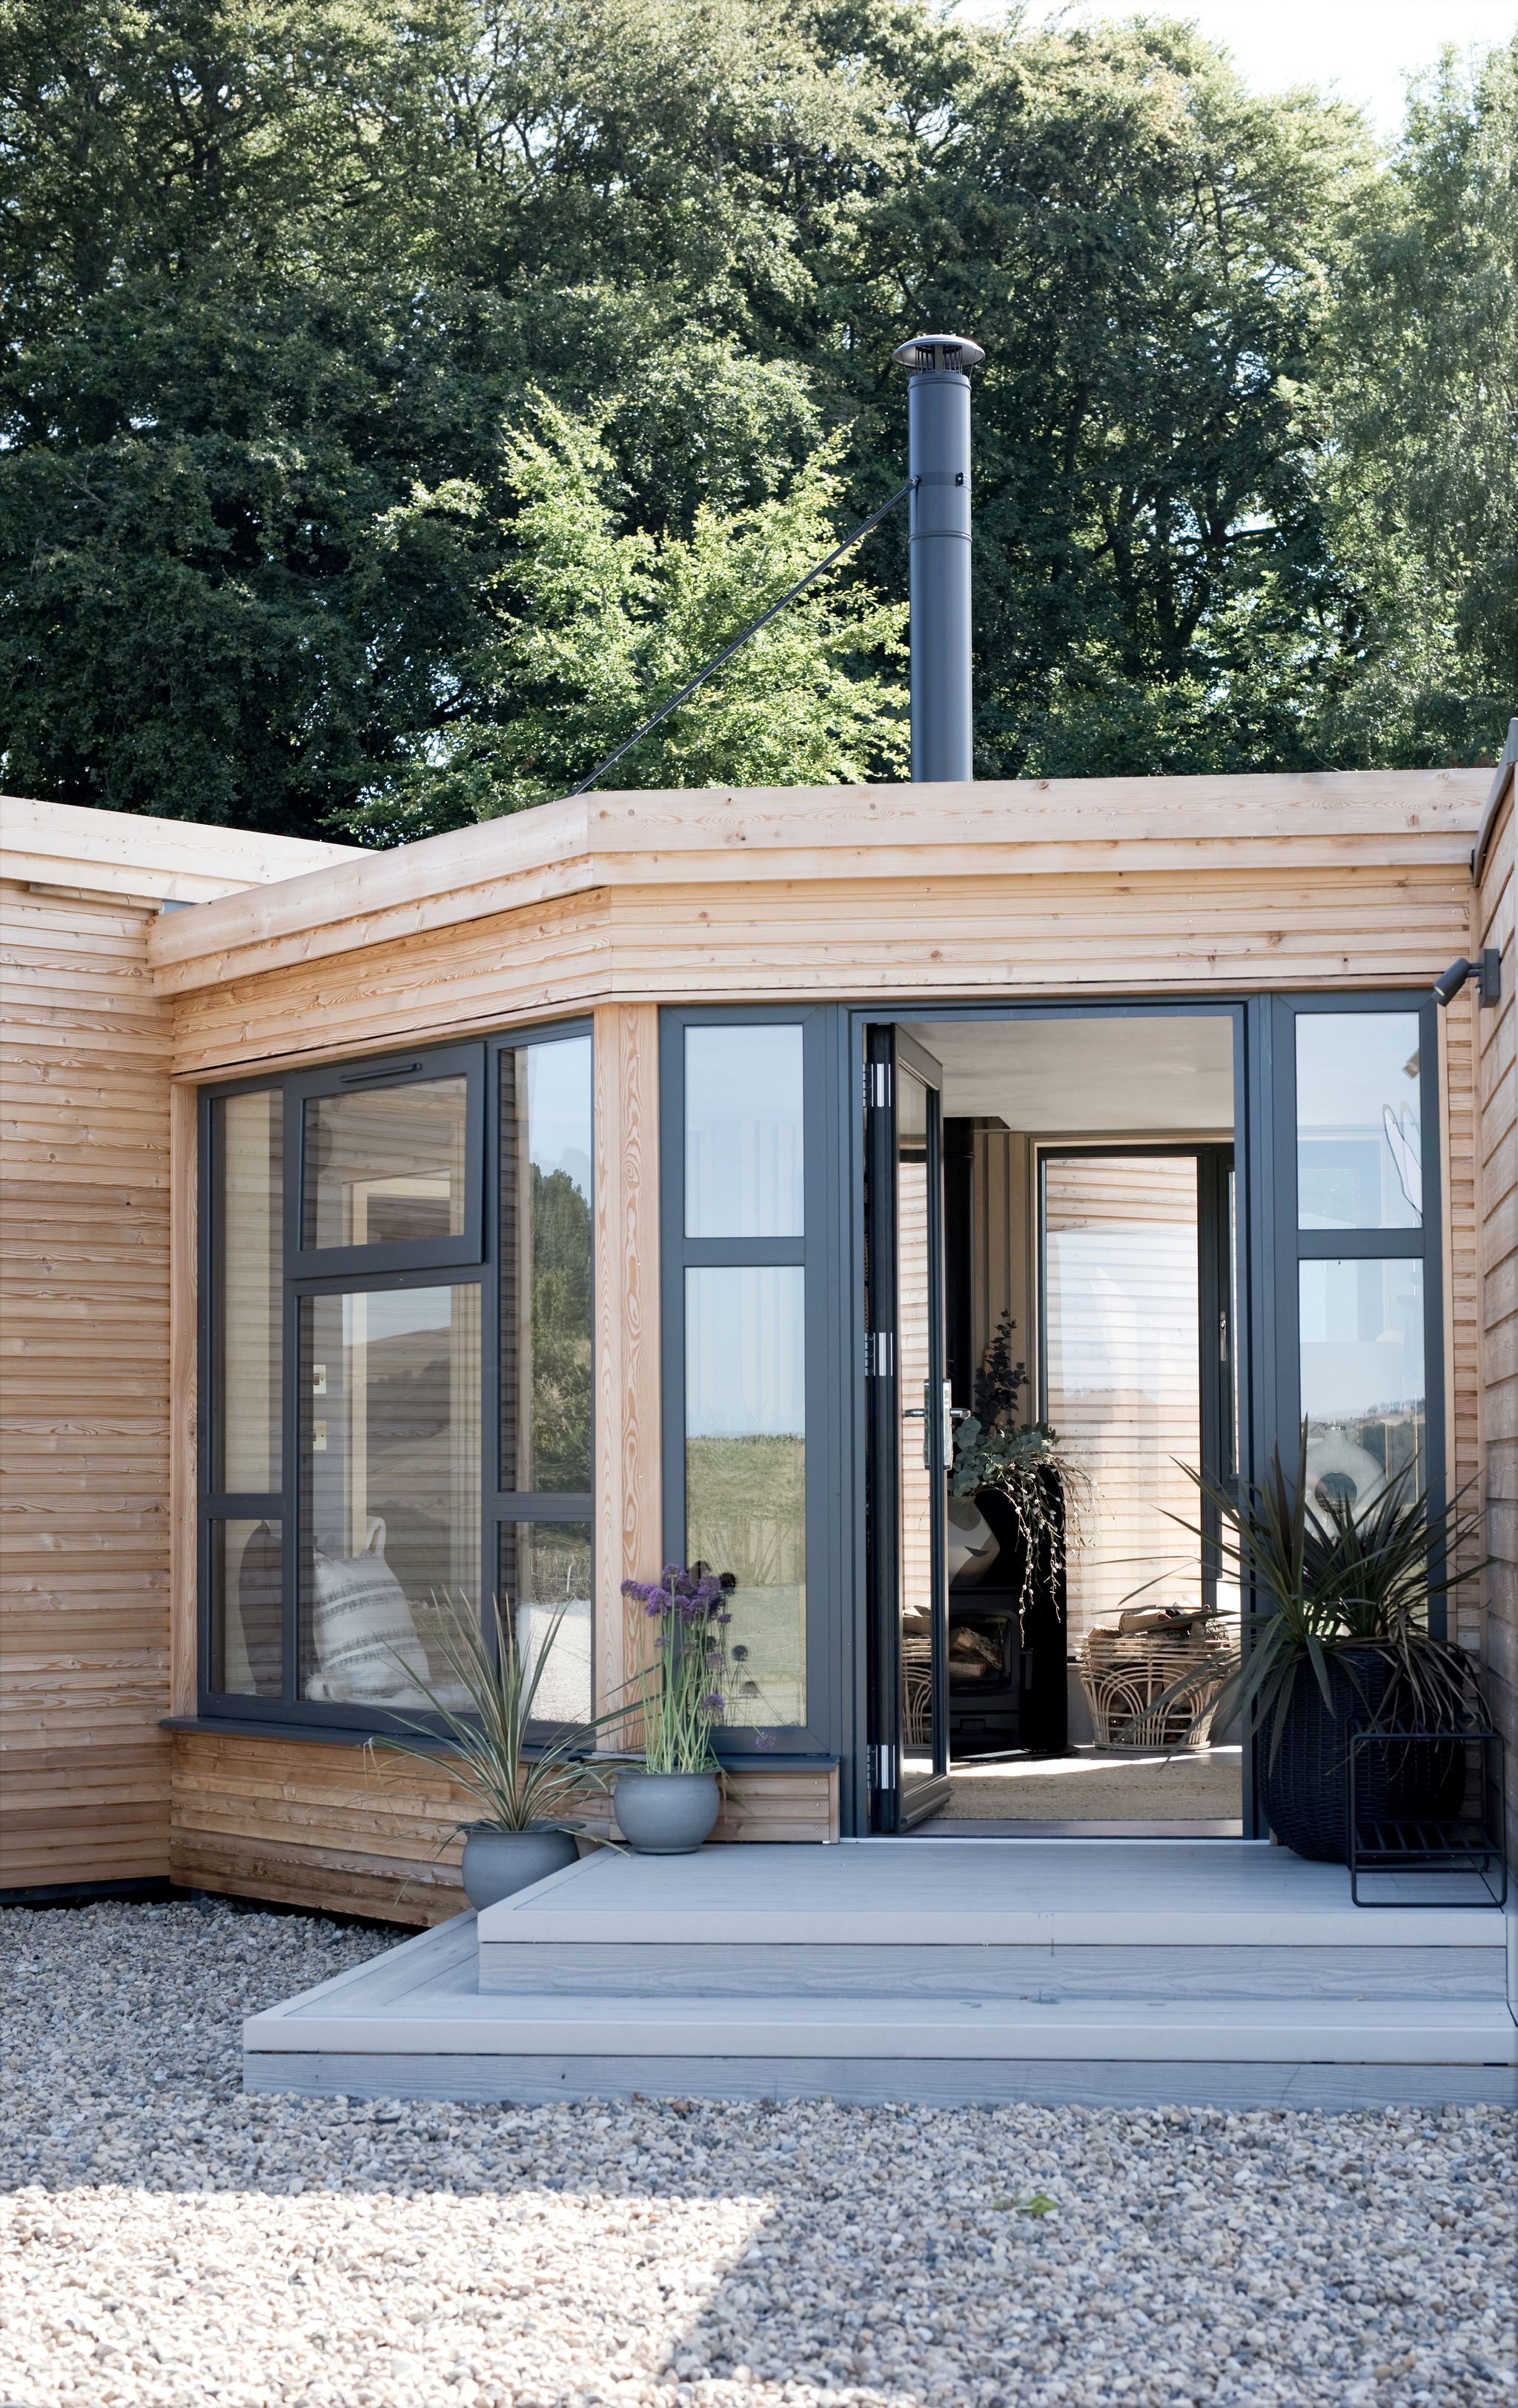 The Railway Carriage - front entrance into this home for one or two